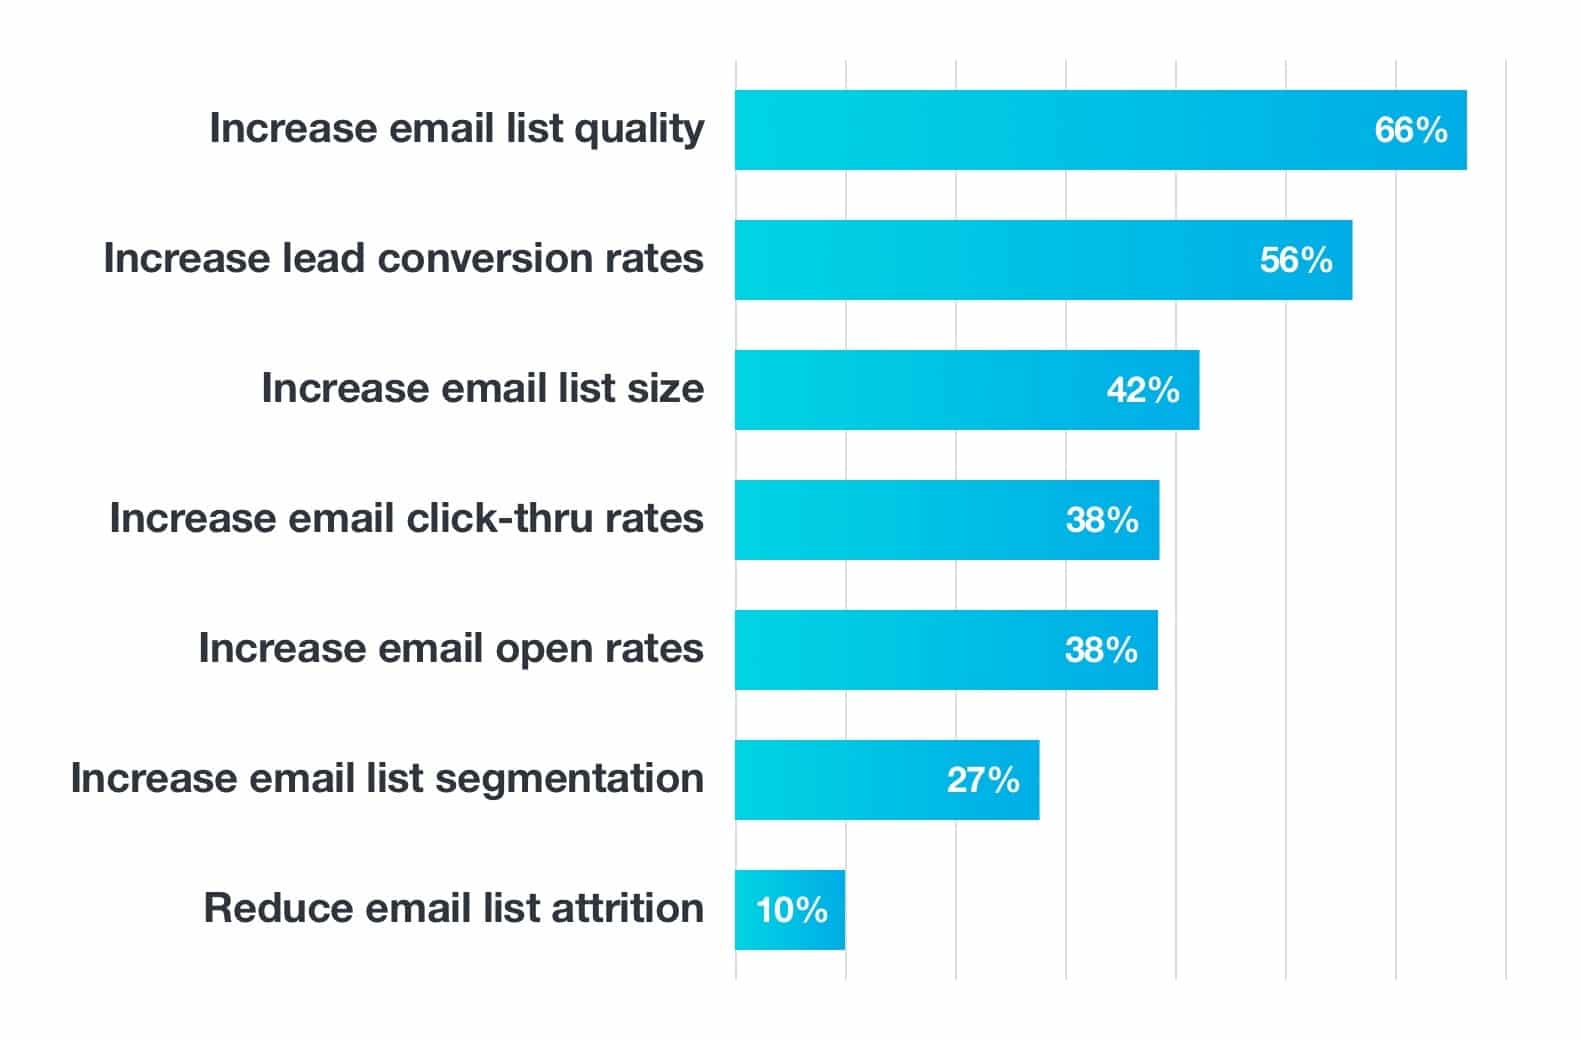 66% of marketers included in a recent survey said that they want to work on increasing their email list quality.